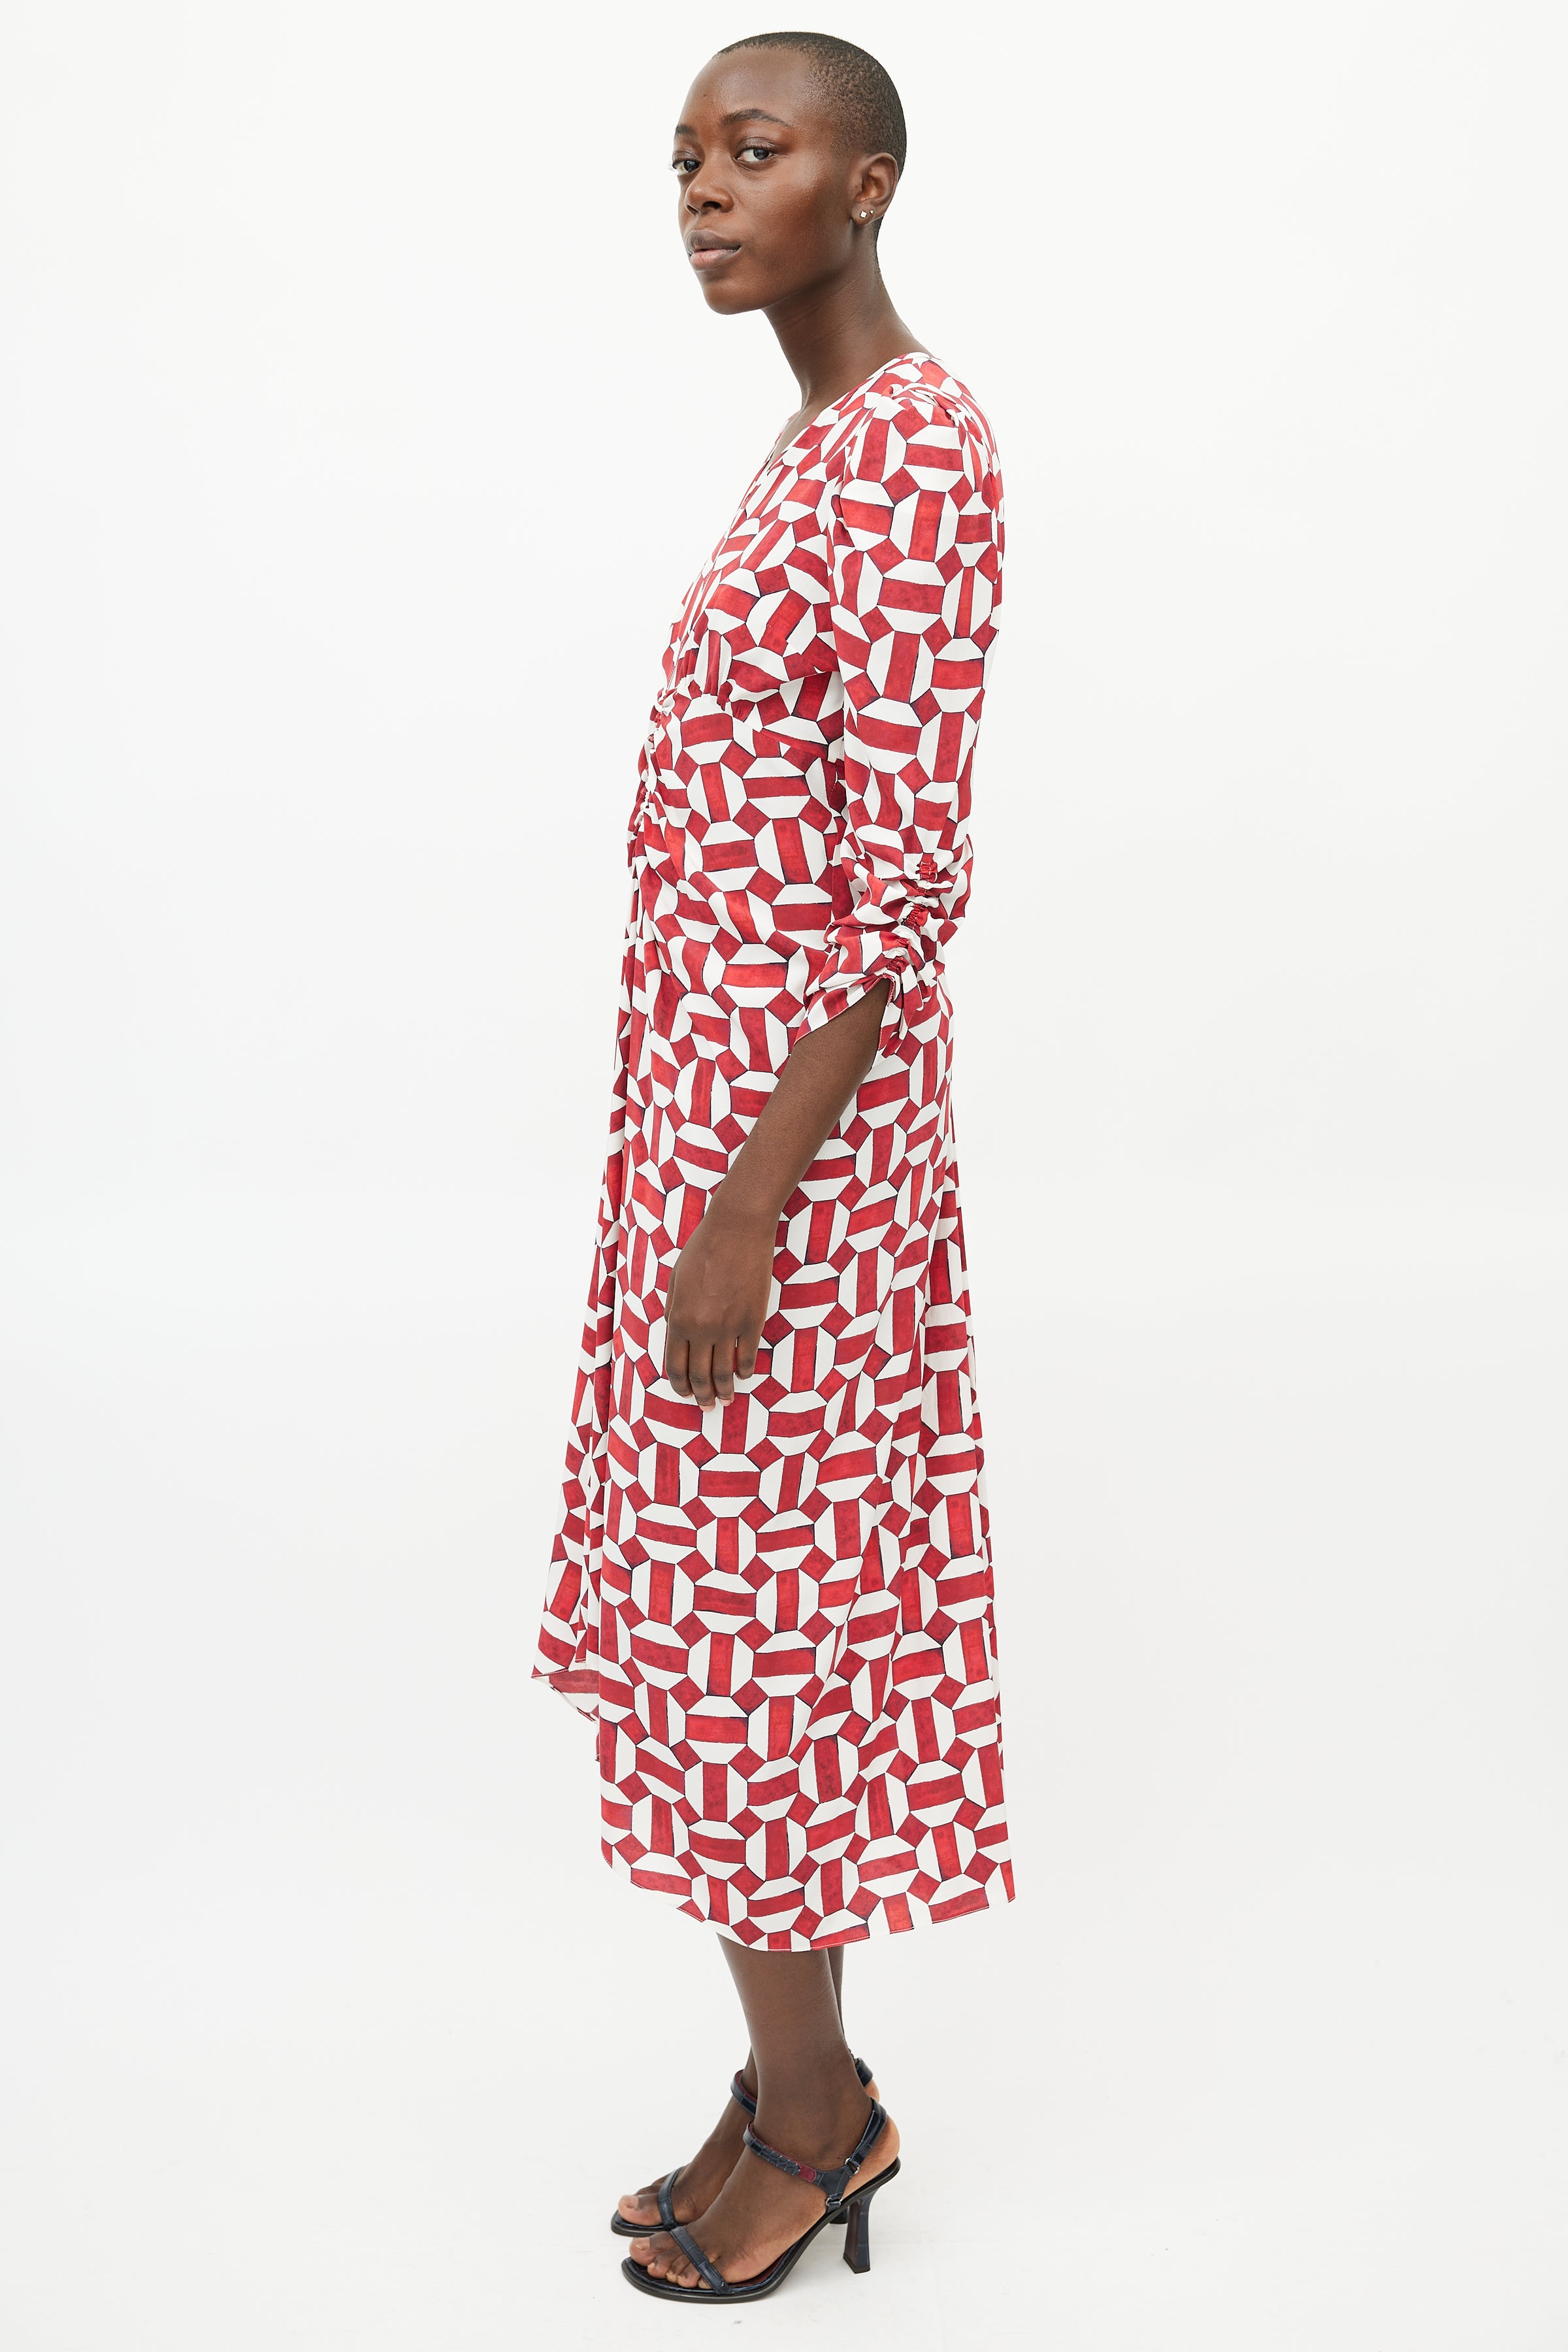 Isabel Marant // Red & White Ruched Geometric Dress – VSP Consignment